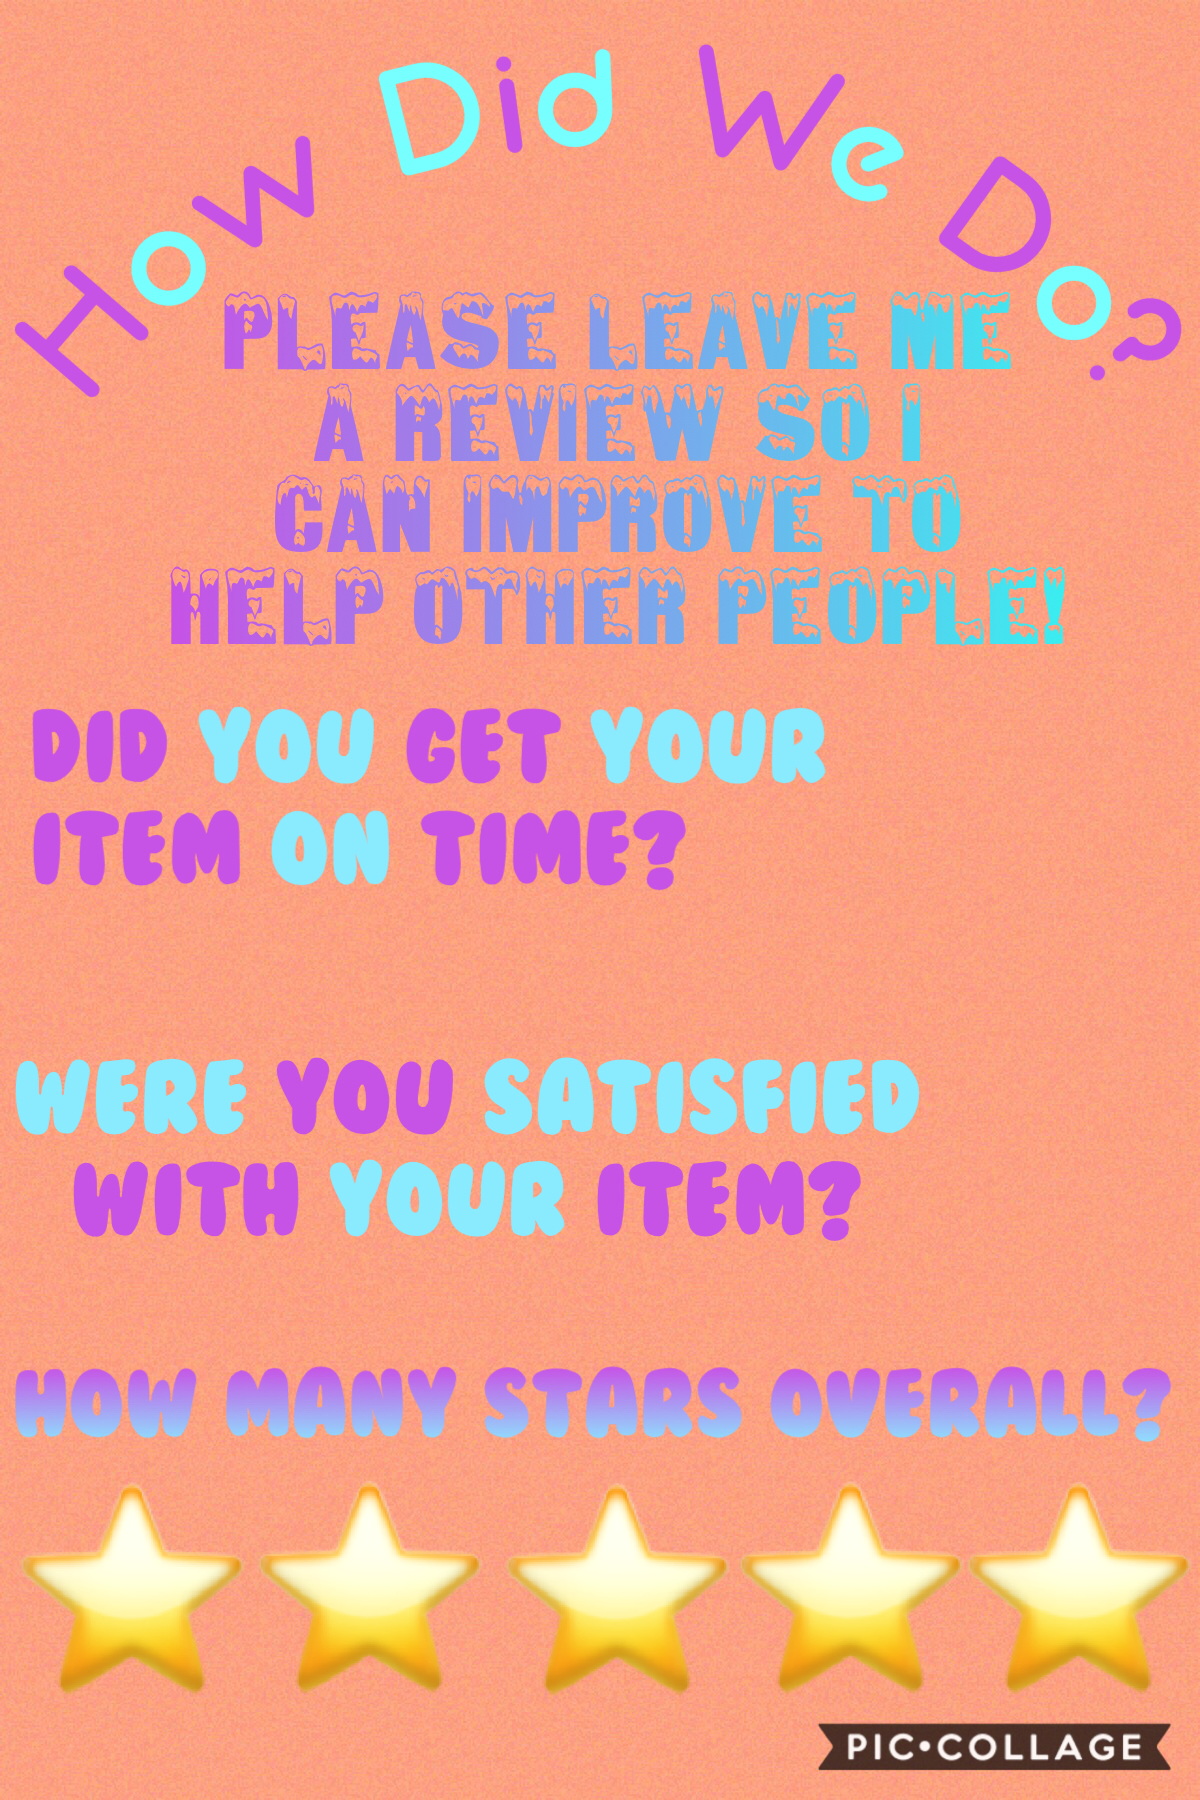 Please fill this form out after you receive your item! Thank you for your support!